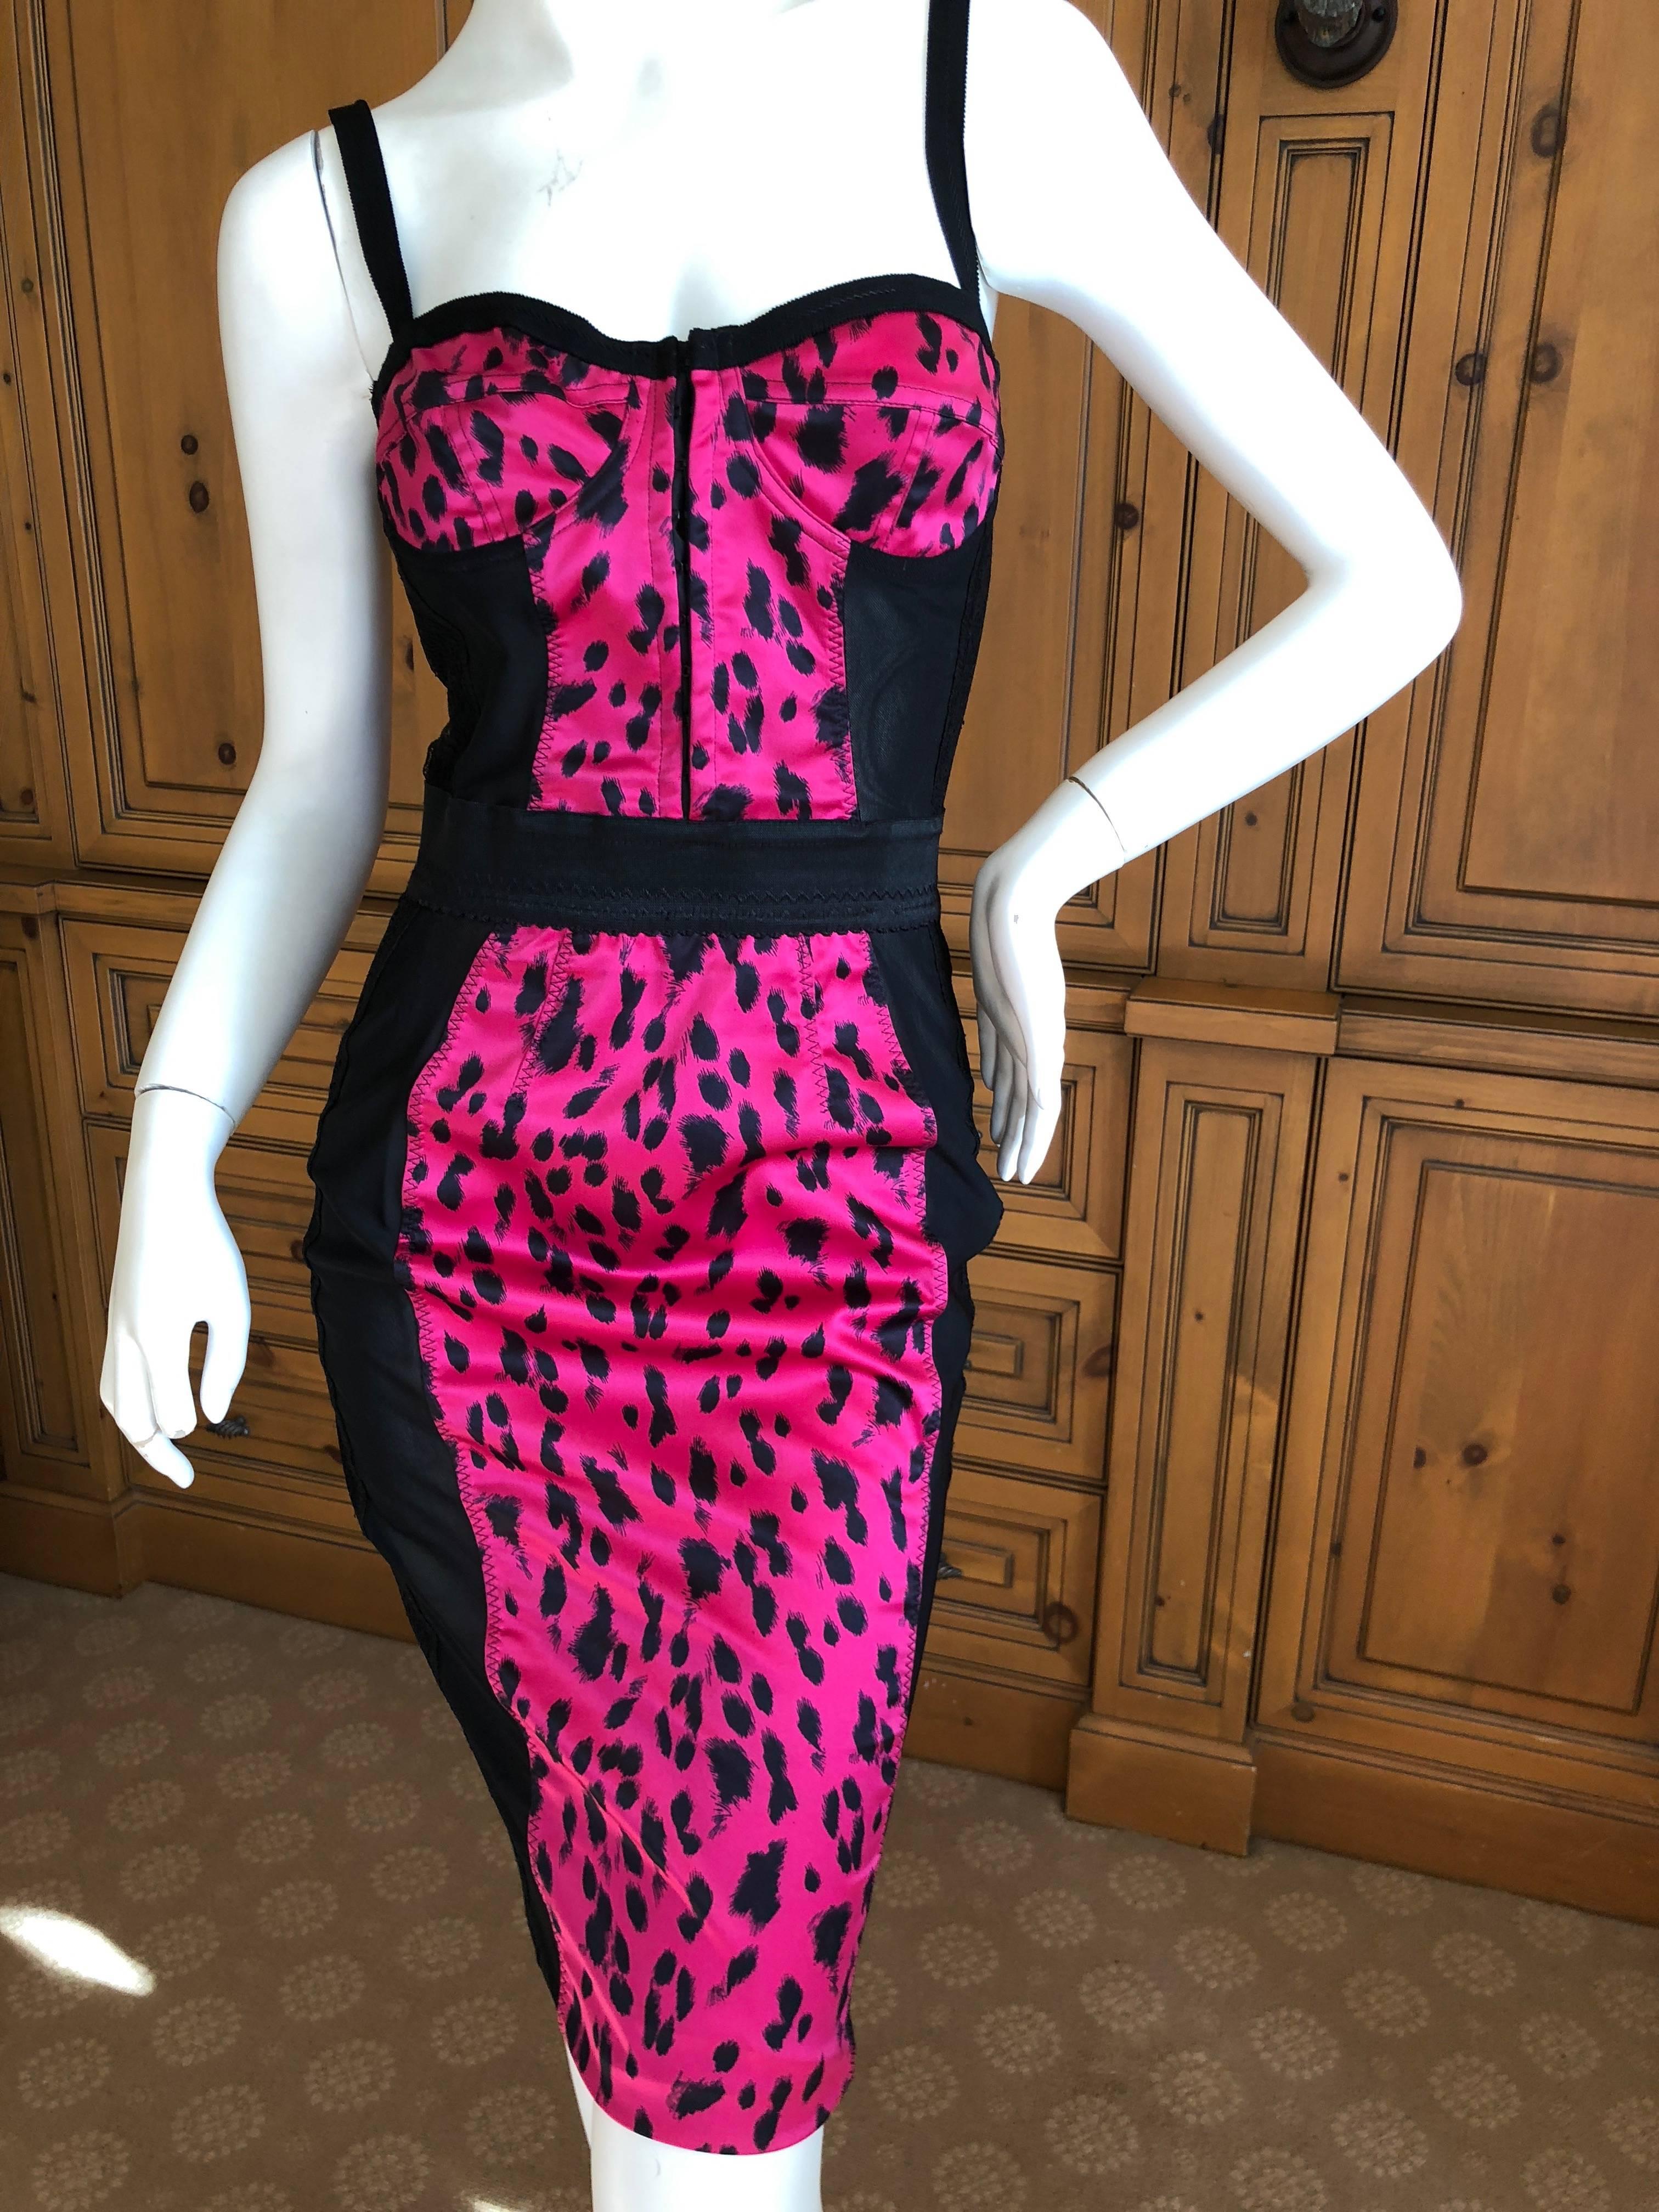 Sexy boddy con dress with pink leopard and lace from Dolce & Gabanna D&G

Size 40
Bust 34